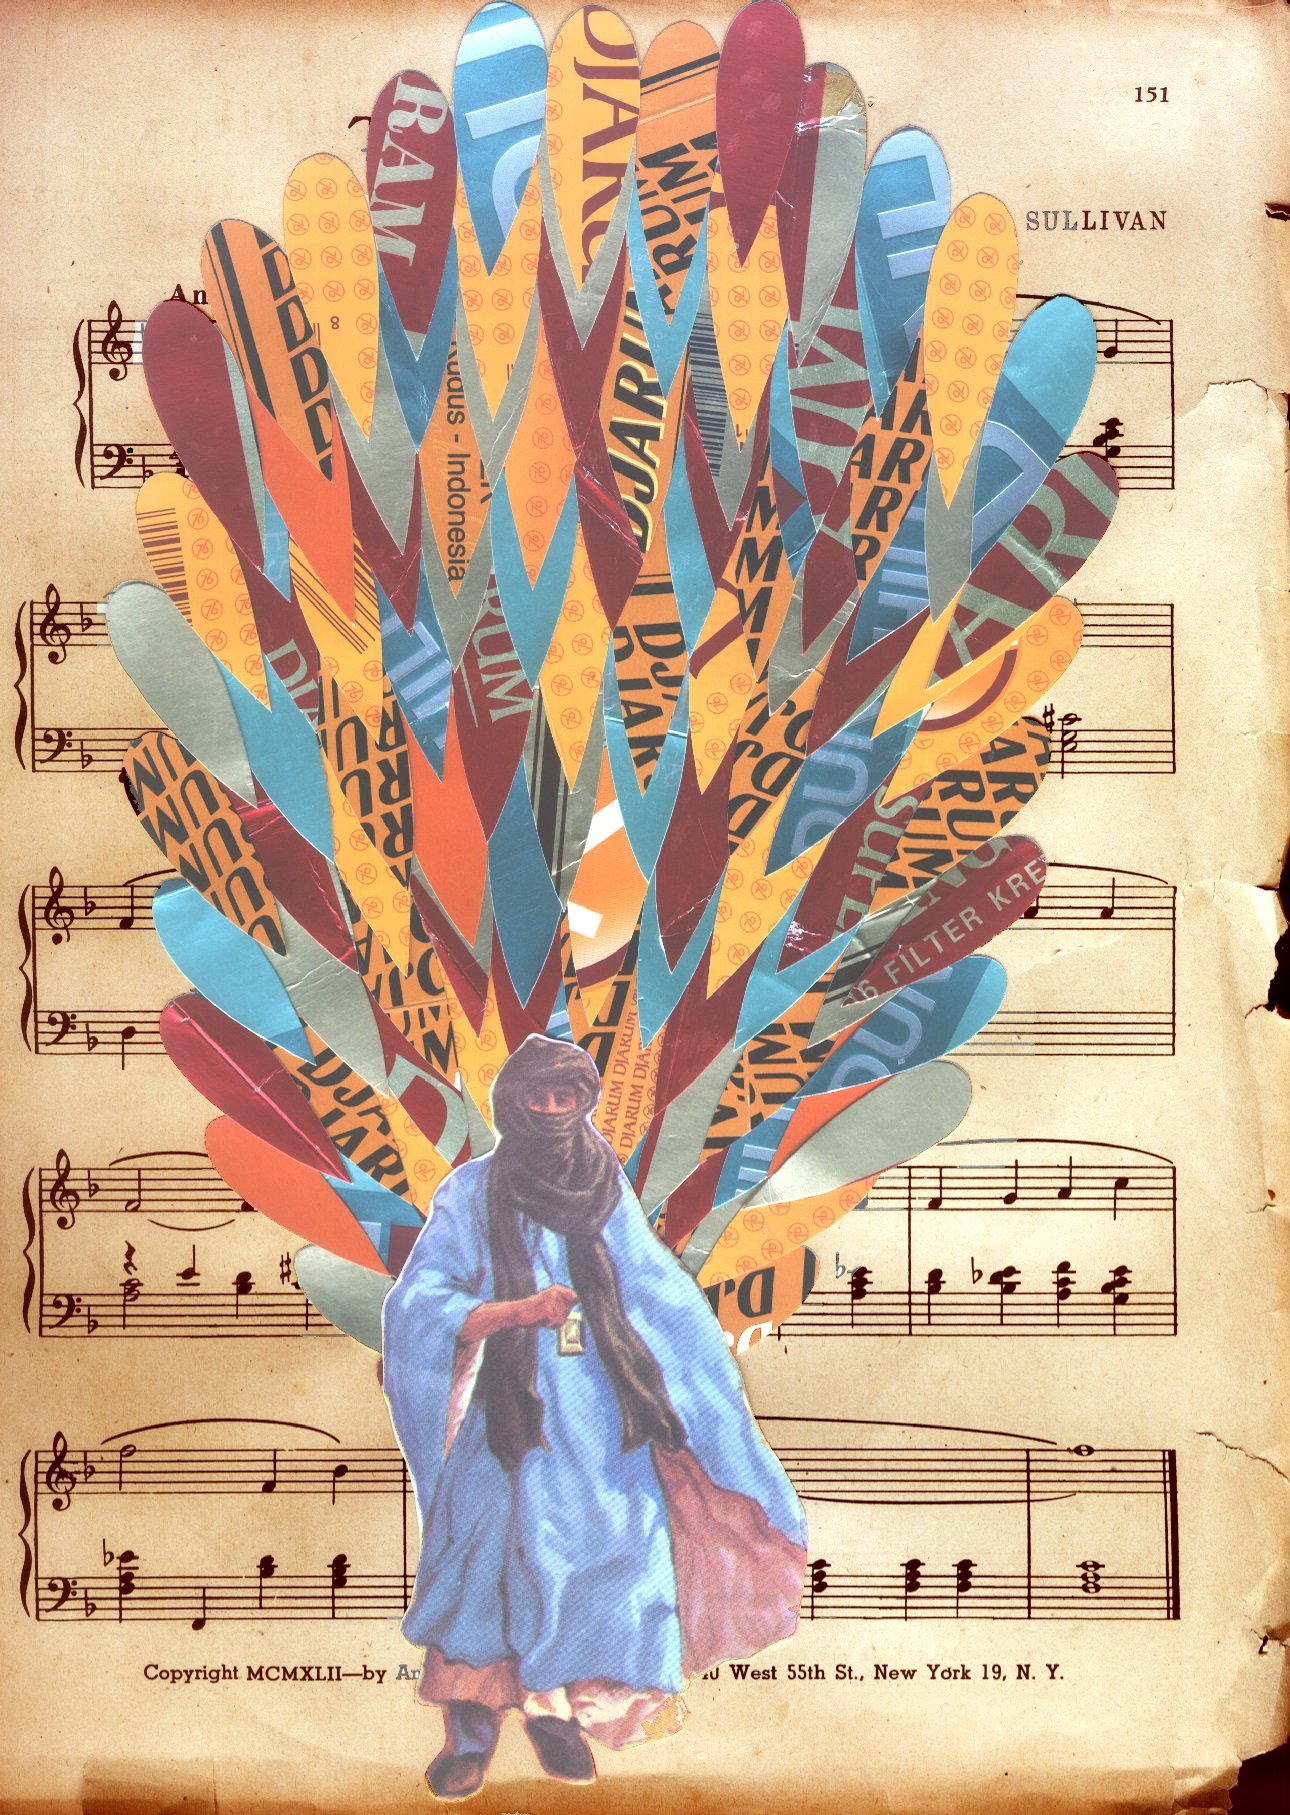 an image of a browning musical sheet with tear-shaped details in blue, yellow and dark red coming out of an image of a man wearing dessert tunic. Pretty Messiah, 2009. Manual Collage. Art by Vantiani.